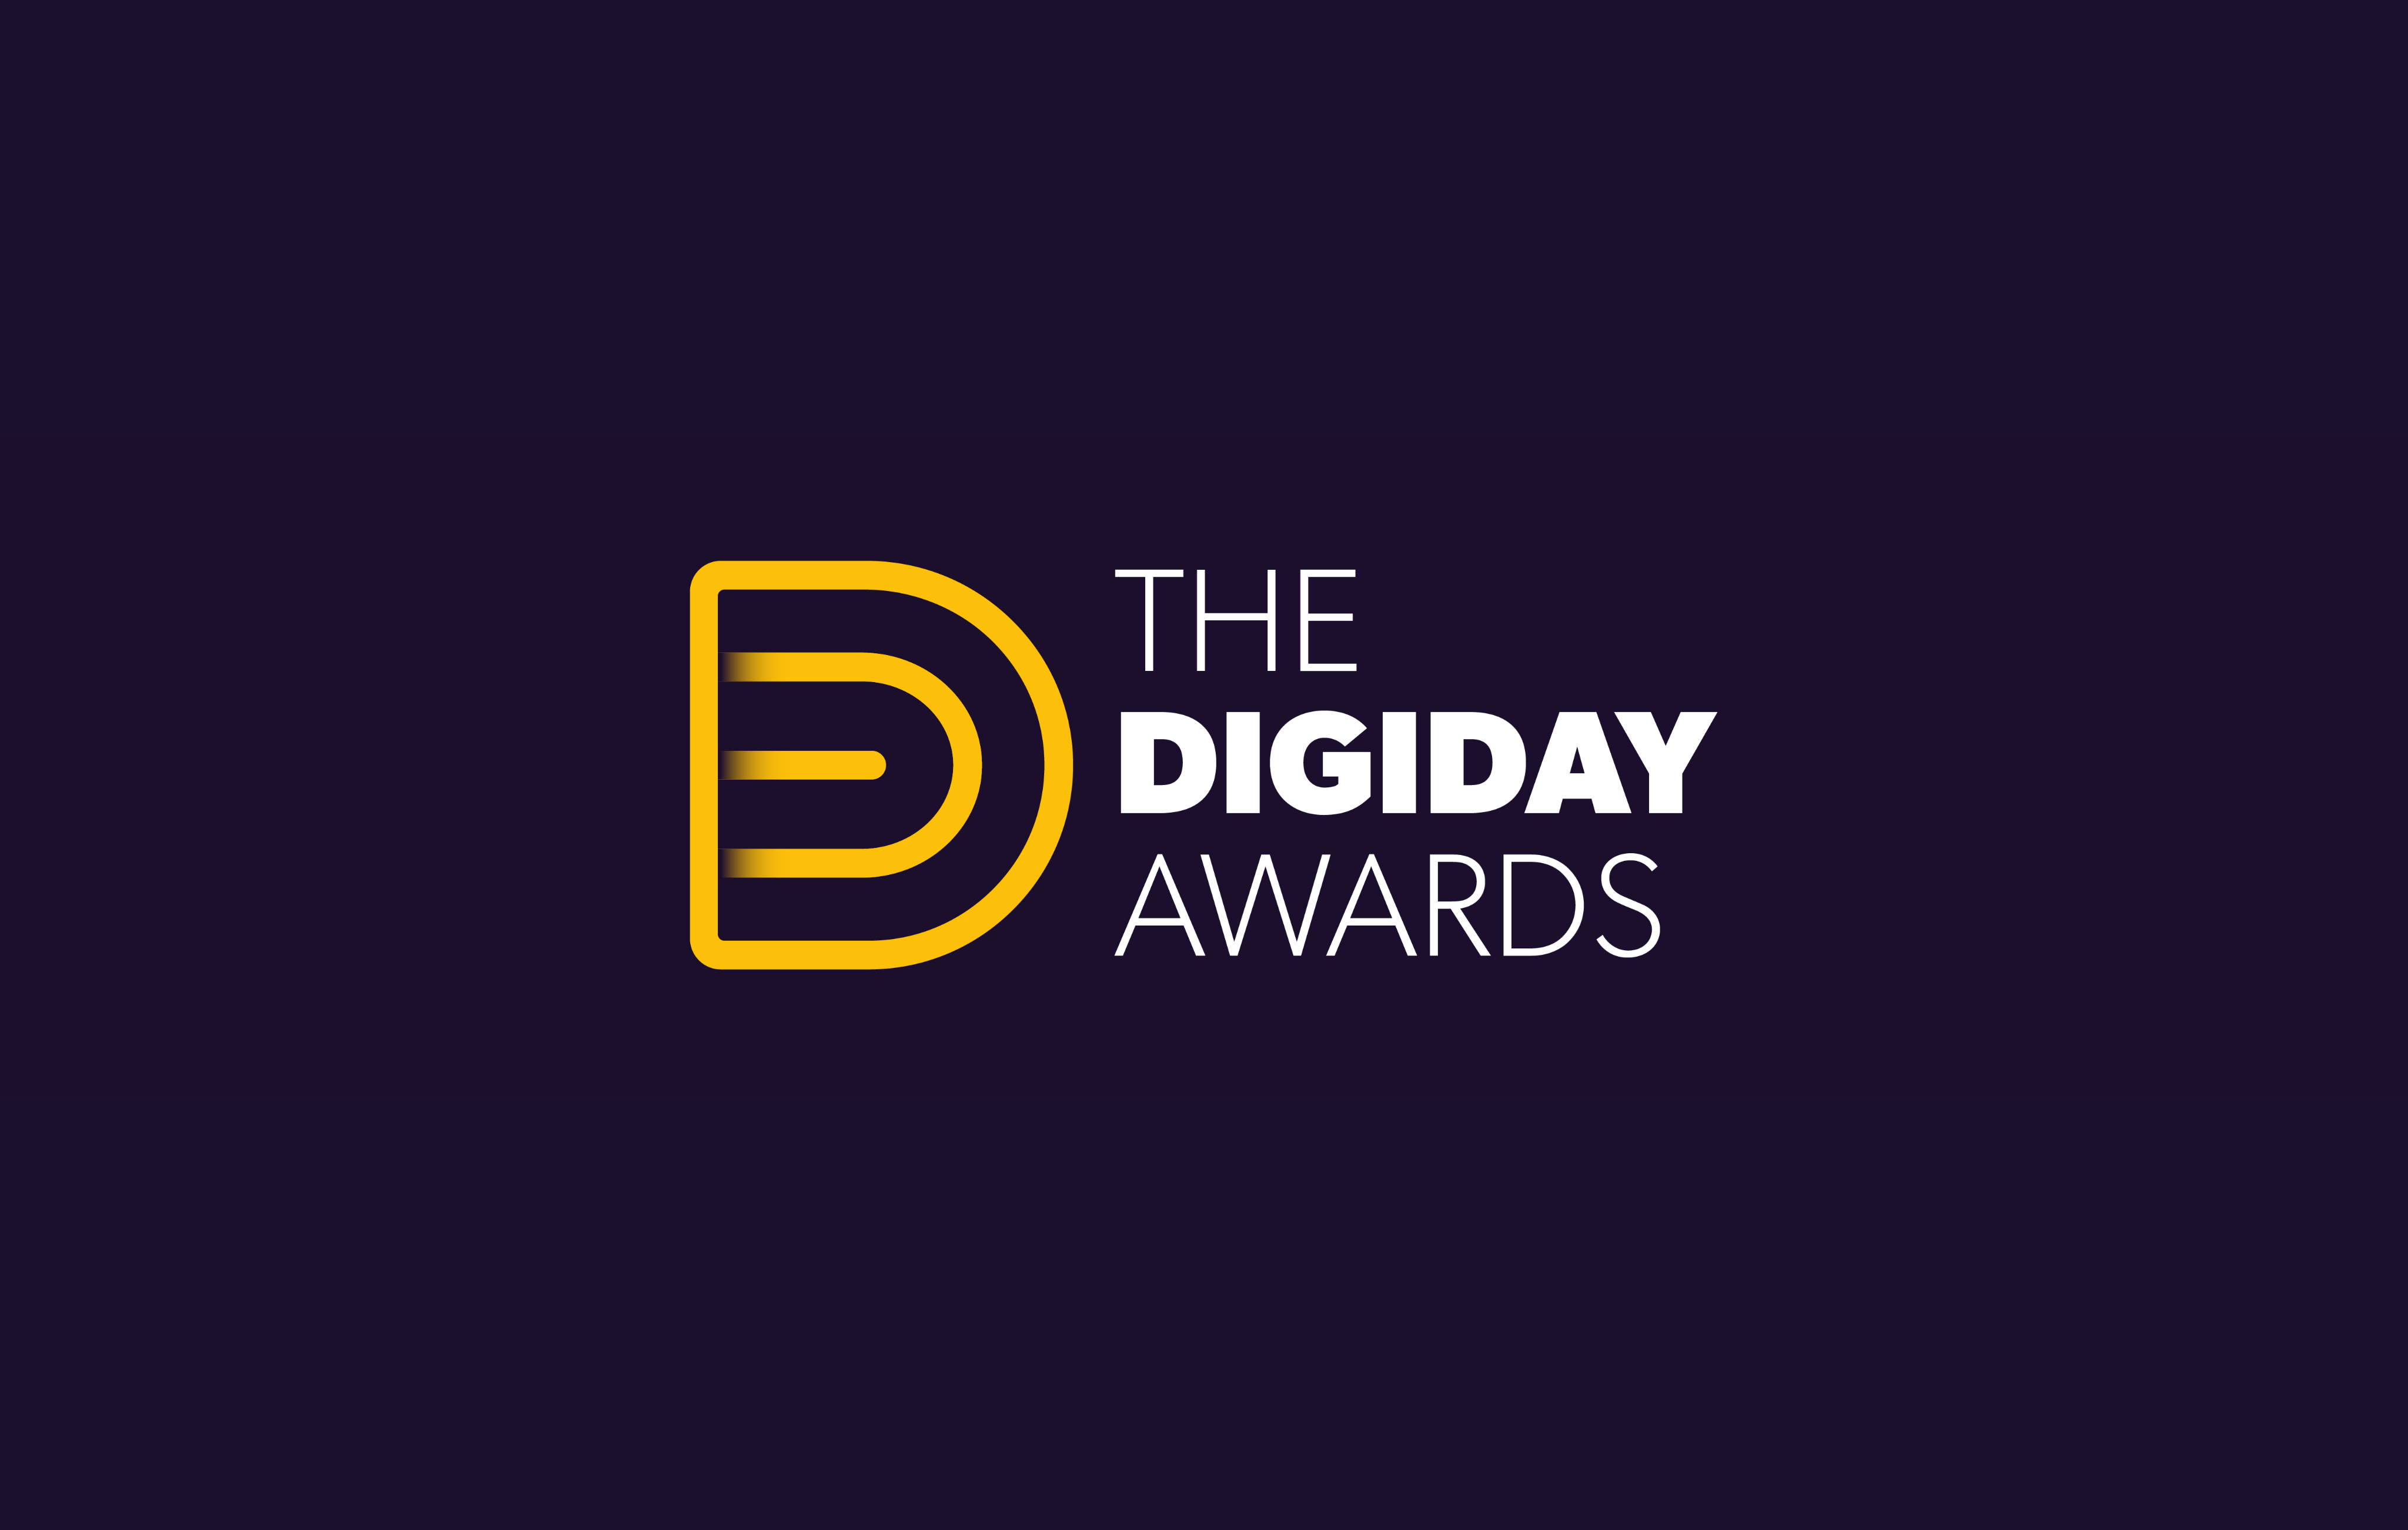 Teads, Edelman, VICE Media Group and Imagination are among this year’s Digiday Awards finalists